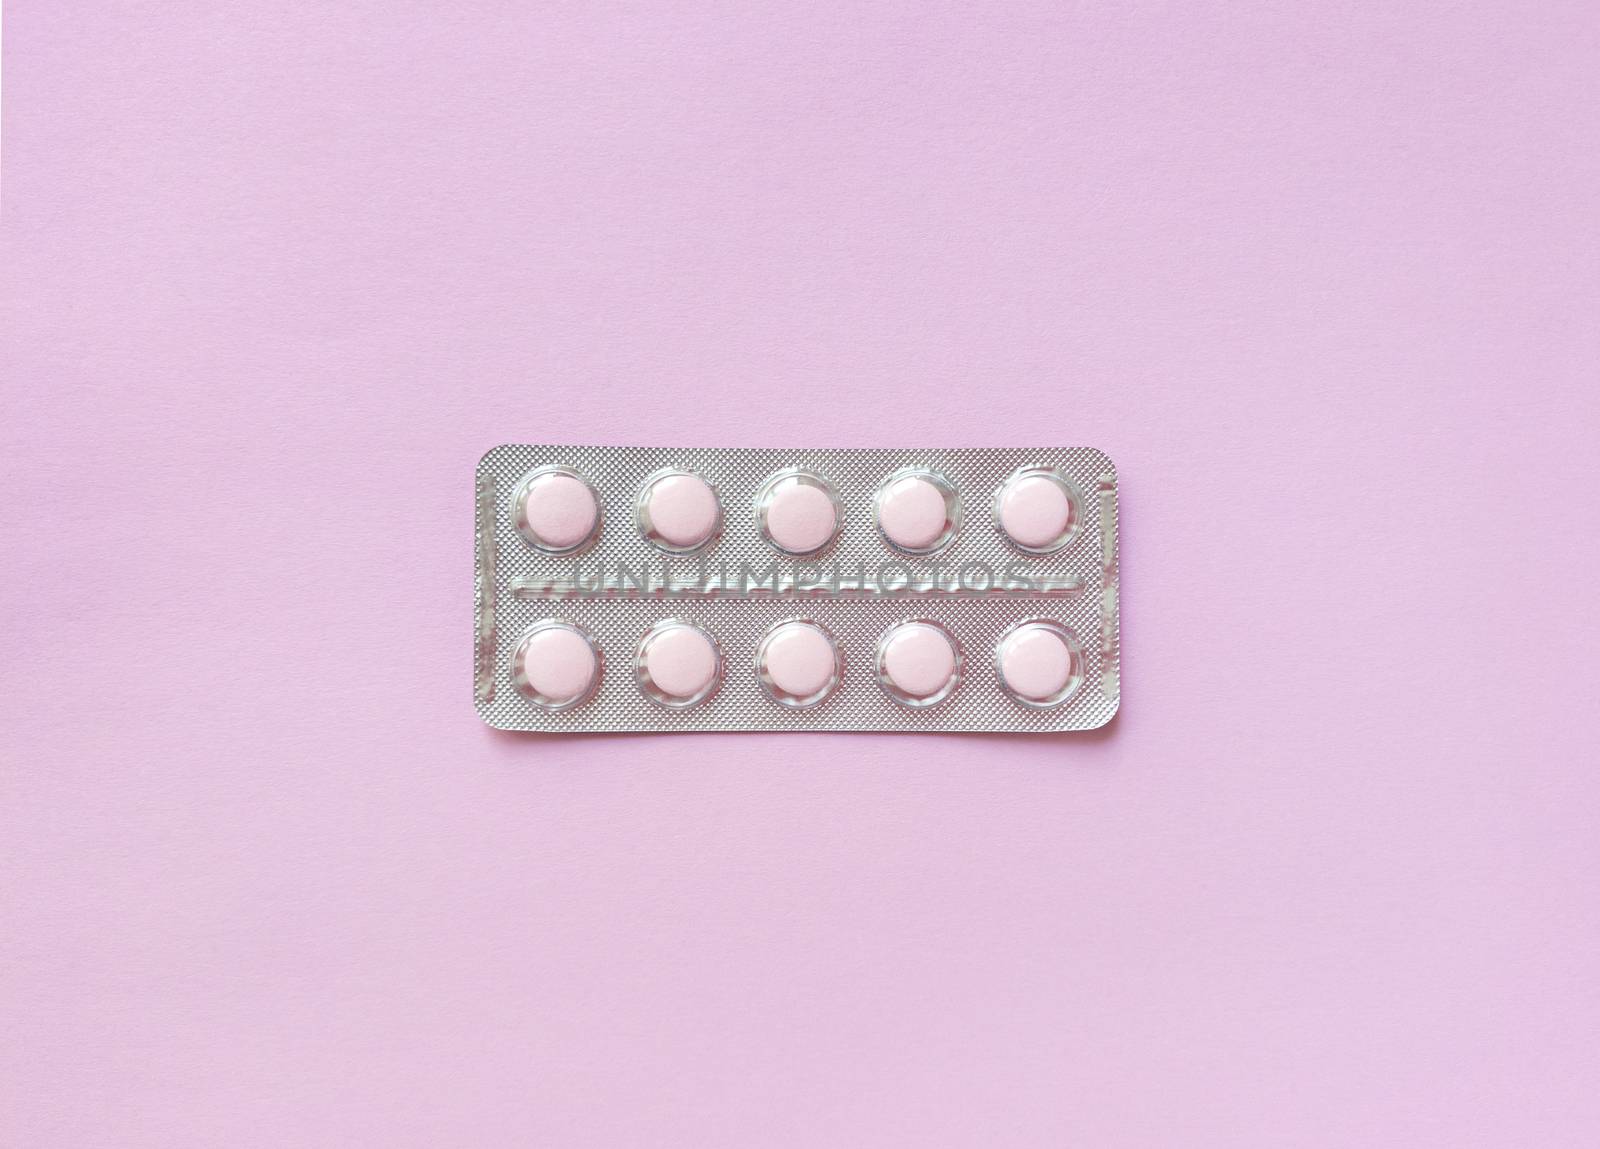 A blister of soft pink pills in the middle on pink background. Monochrome simple flat lay with pastel texture. Medical concept. Stock photography.